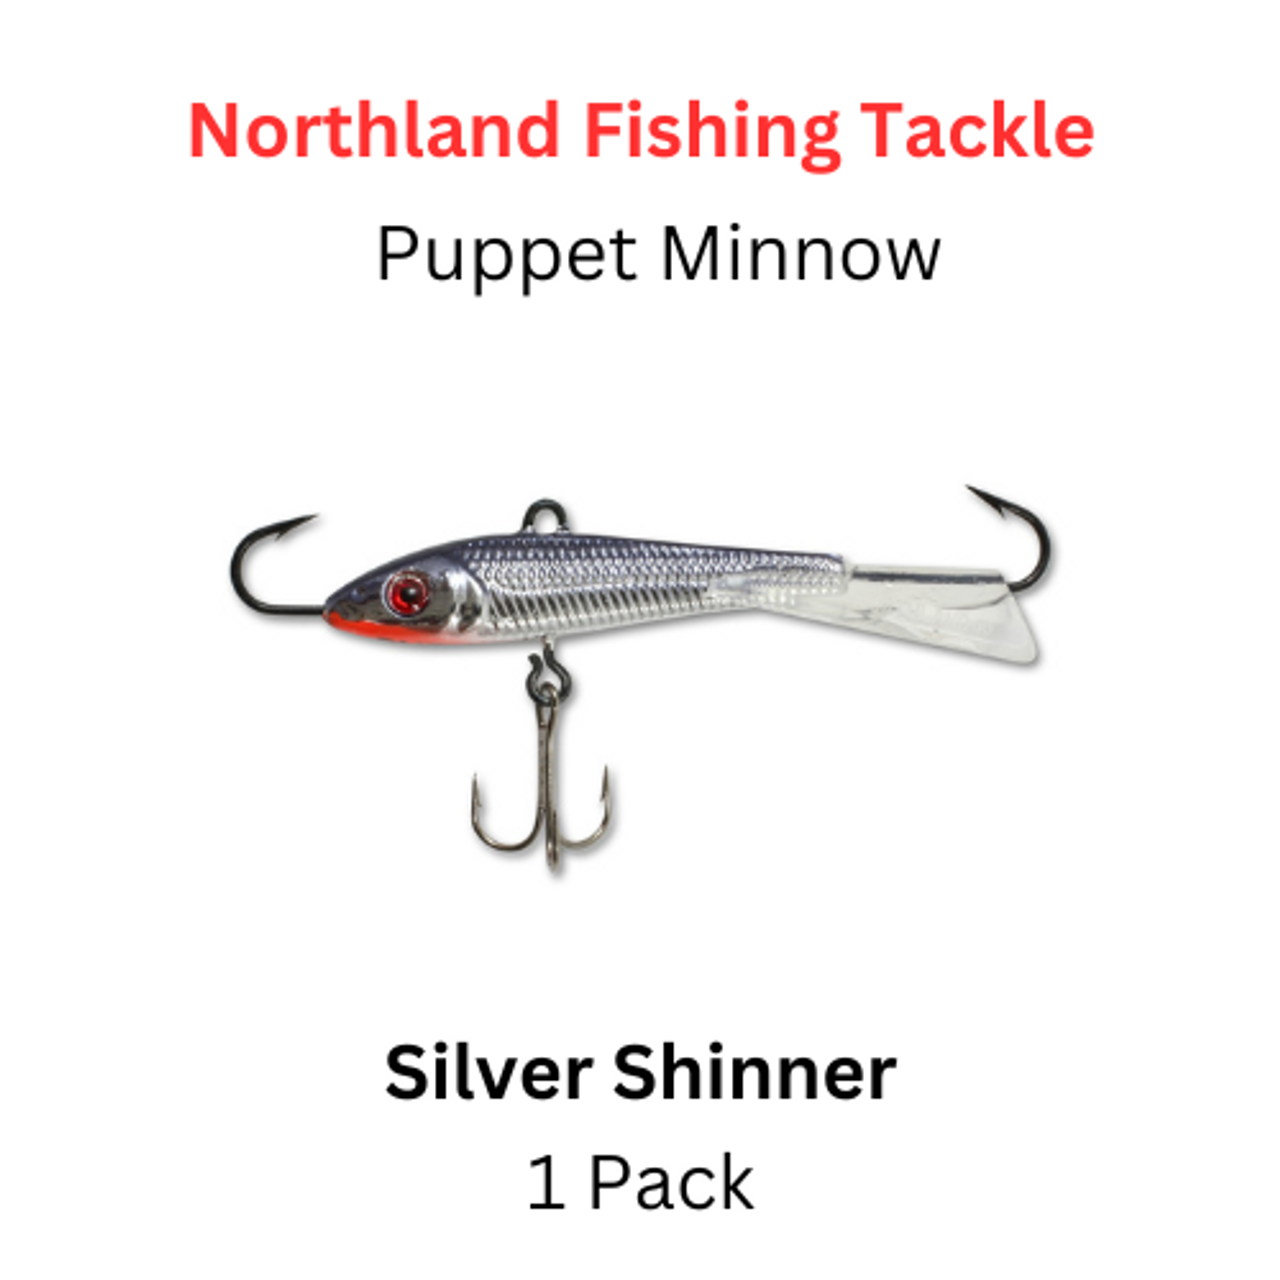 https://cdn11.bigcommerce.com/s-u9nbd/images/stencil/1280x1280/products/6195/15645/Northland_Fishing_Tackle_Puppet_Minnow_Silver_Shinner__80879.1676753611.png?c=2